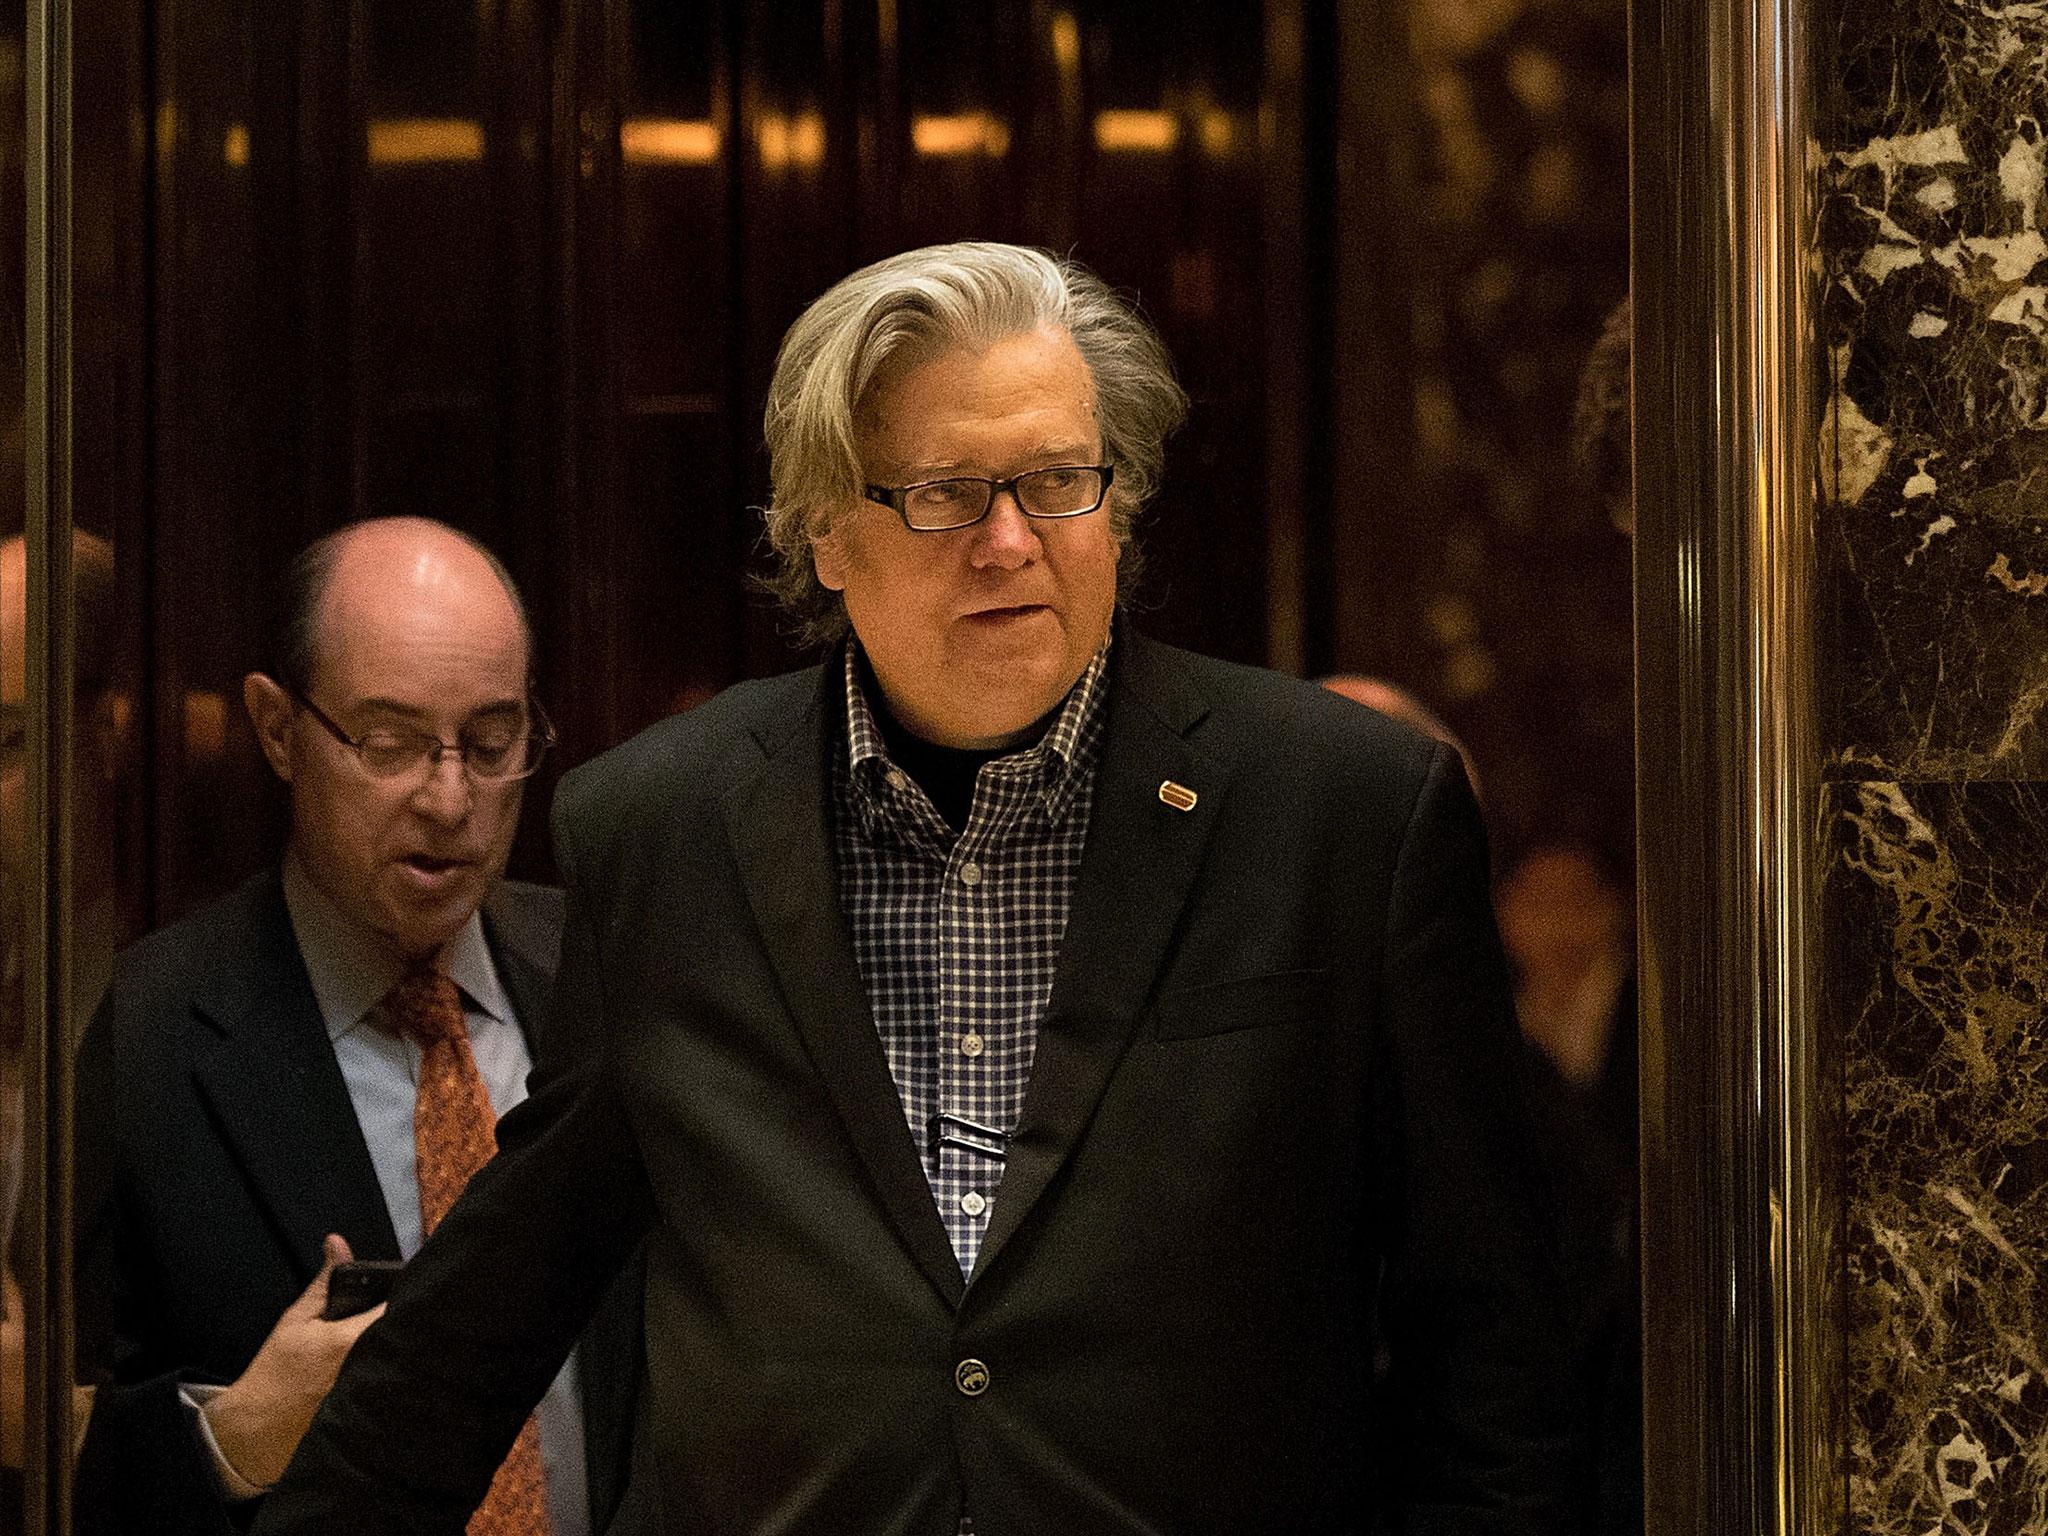 US President-elect Donald Trump appointed Breitbart's boss Steve Bannon as his chief strategist